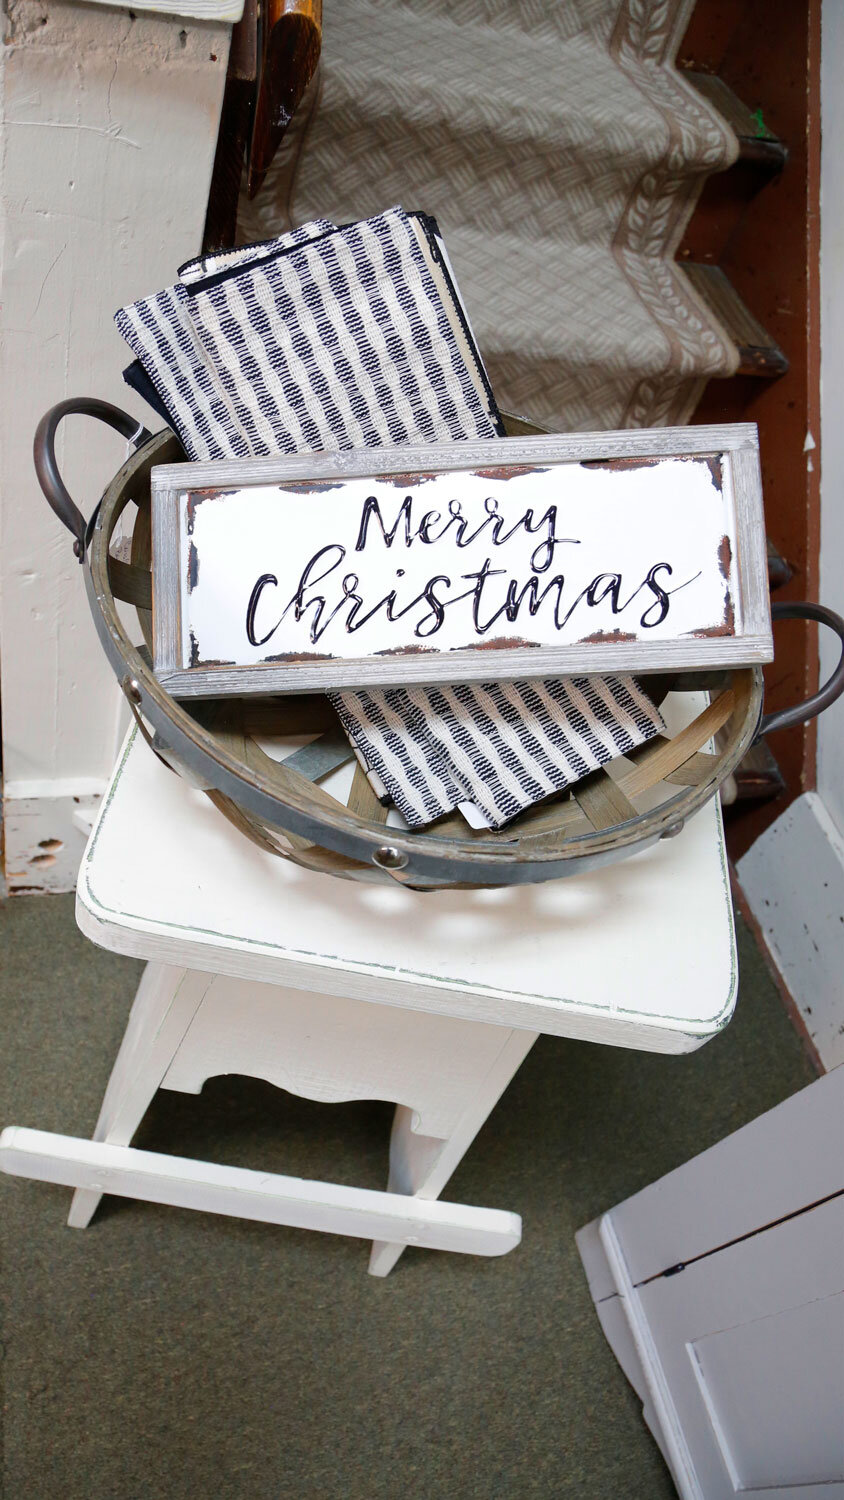 Past and Present Home Gallery Merry Christmas sign